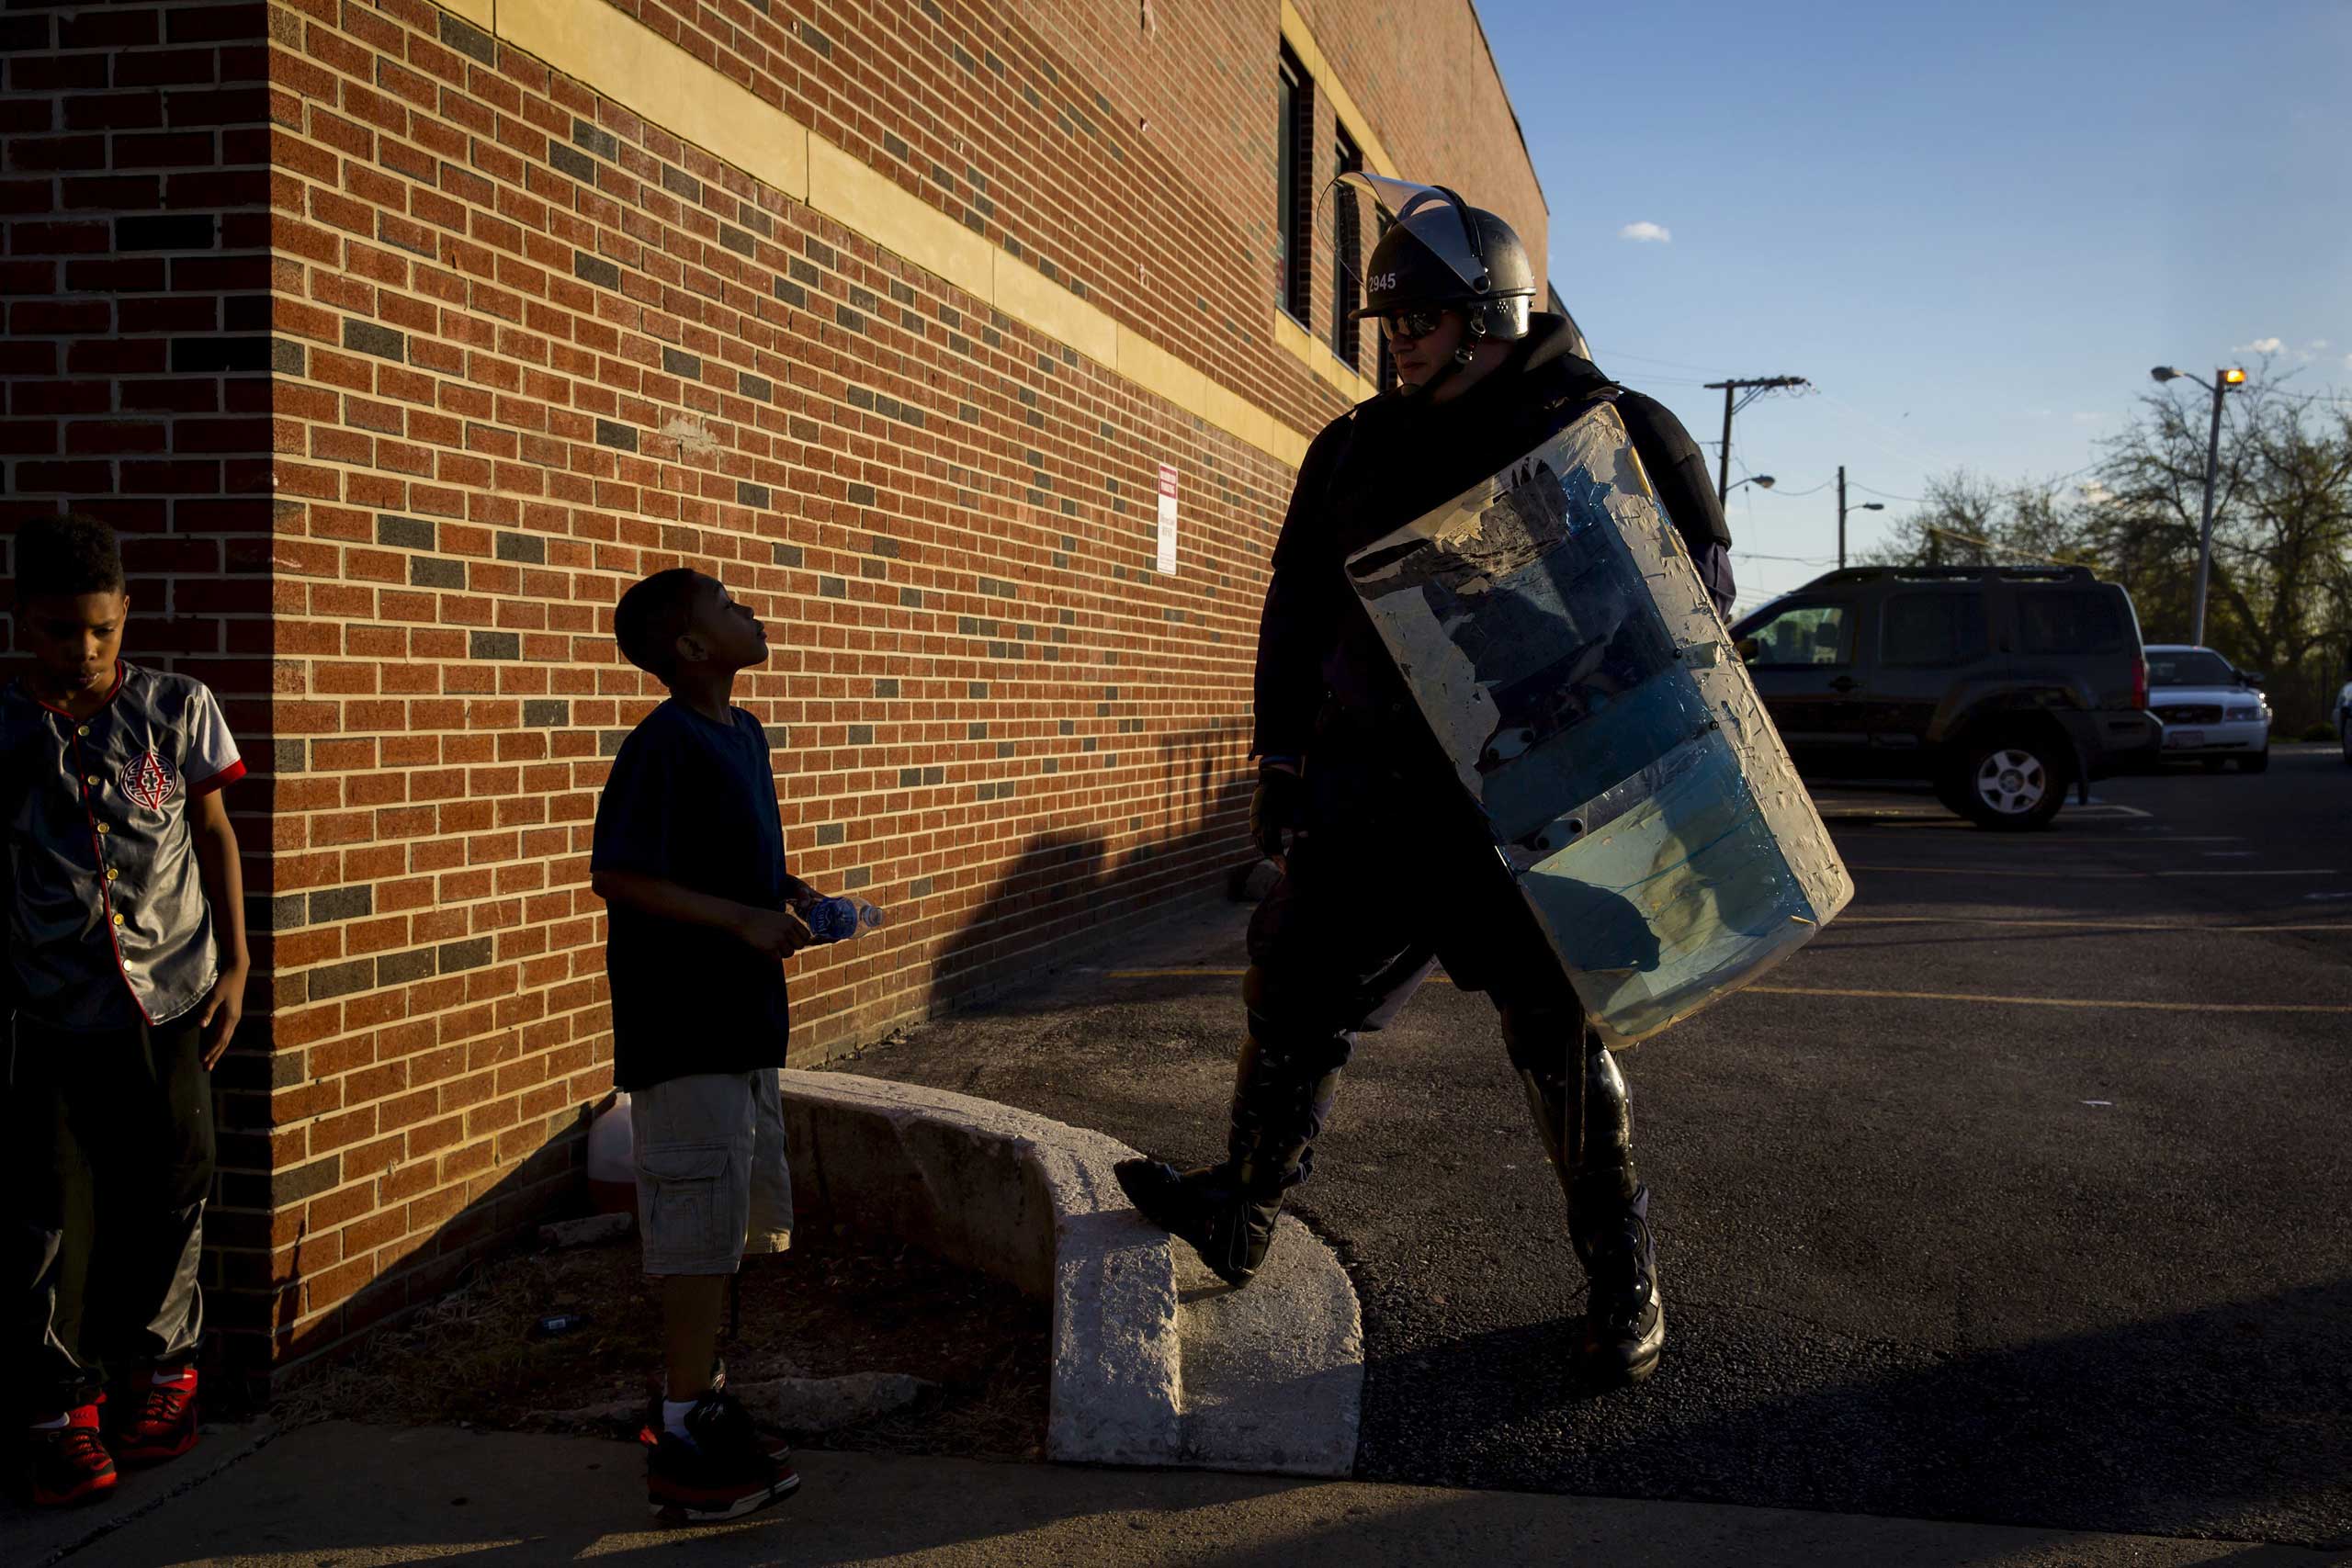 A boy talks to a police officer near North Ave and Pennsylvania Ave in Baltimore on April 28, 2015 (Eric Thayer—Reuters)